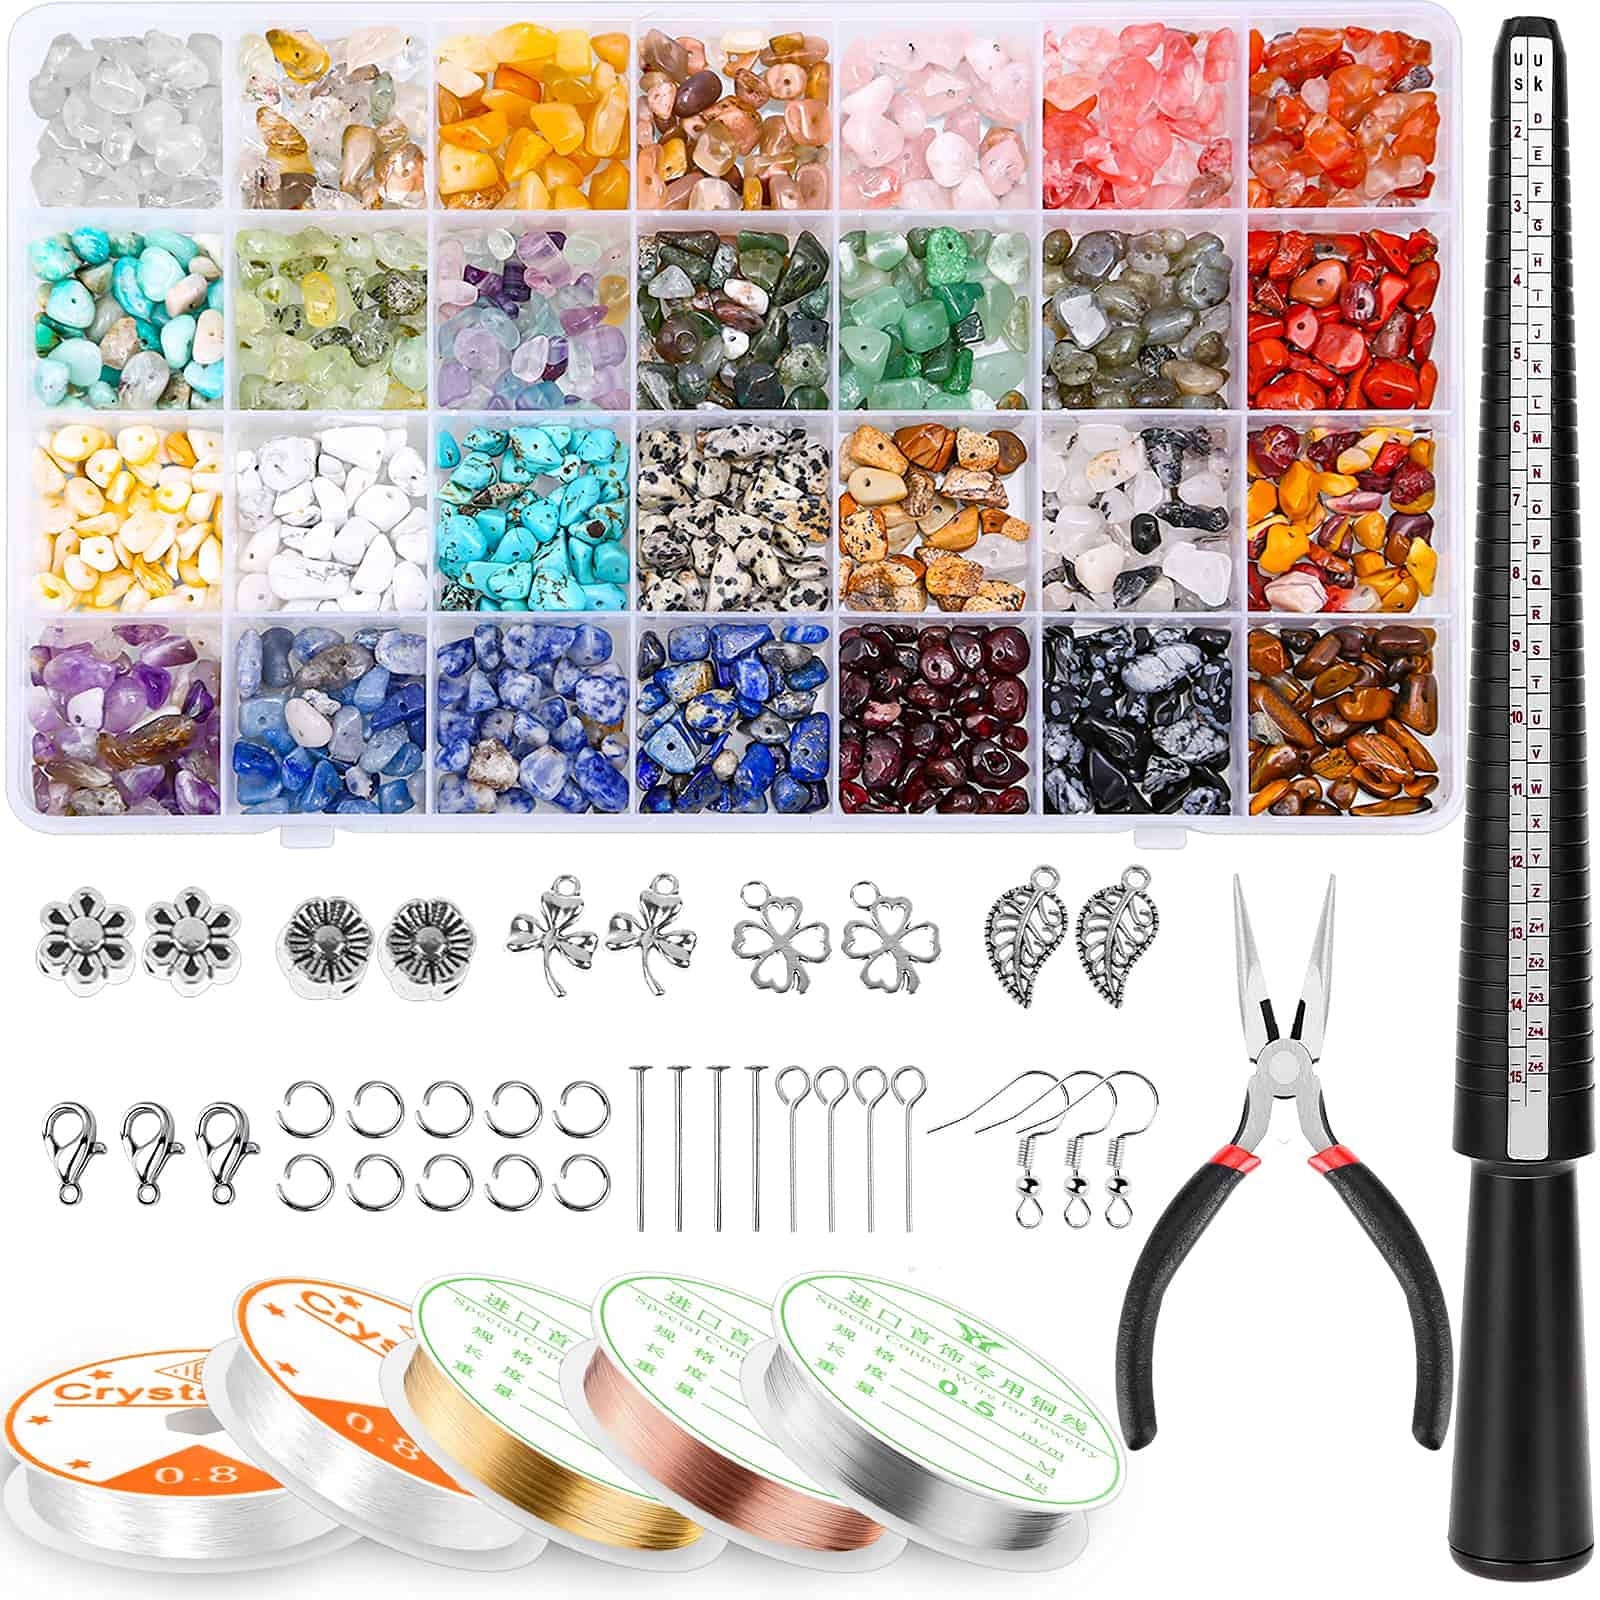 1760PCS Jewelry Making Kit 24 Colors Crystals Beads for Ring Making Kits  with Gemstone Chip Beads Jewelry Wire Pliers and Other Jewelry Making